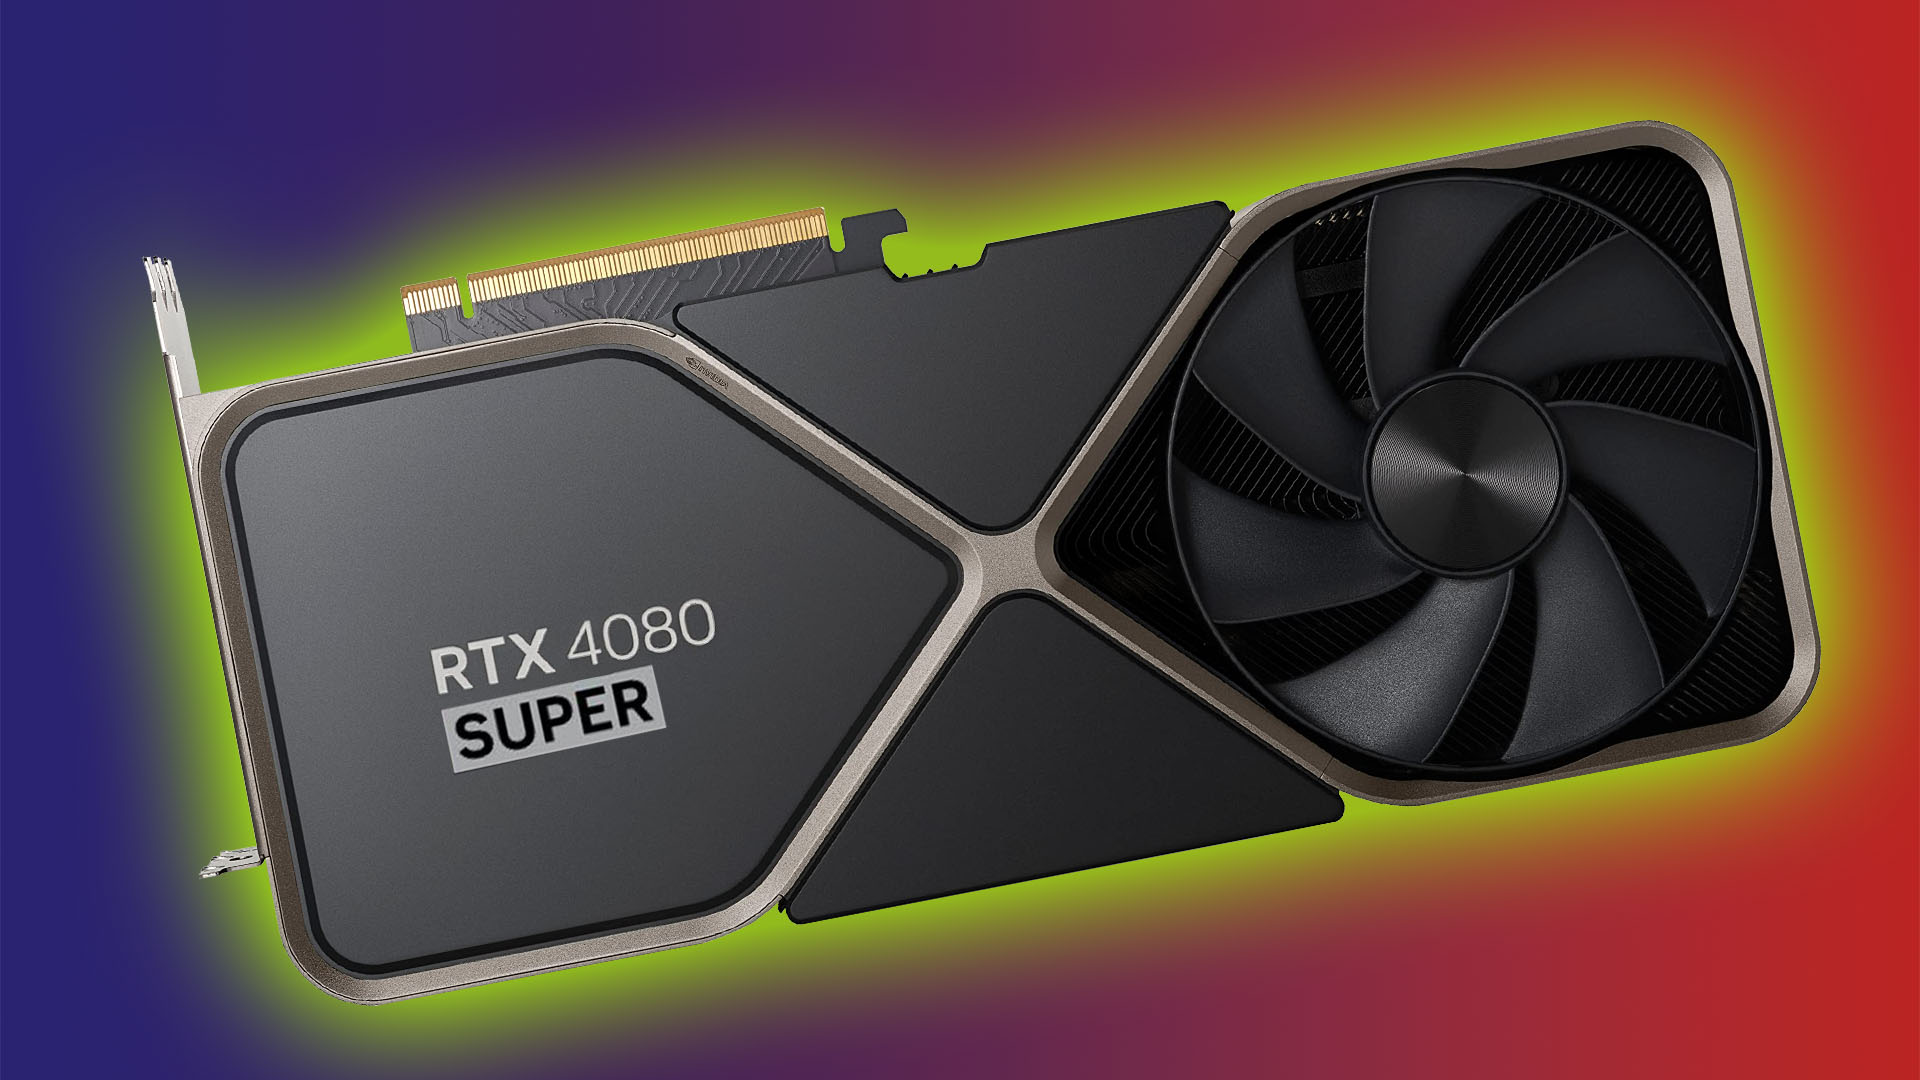 An Nvidia RTX 4080 Super could be coming sooner than you think